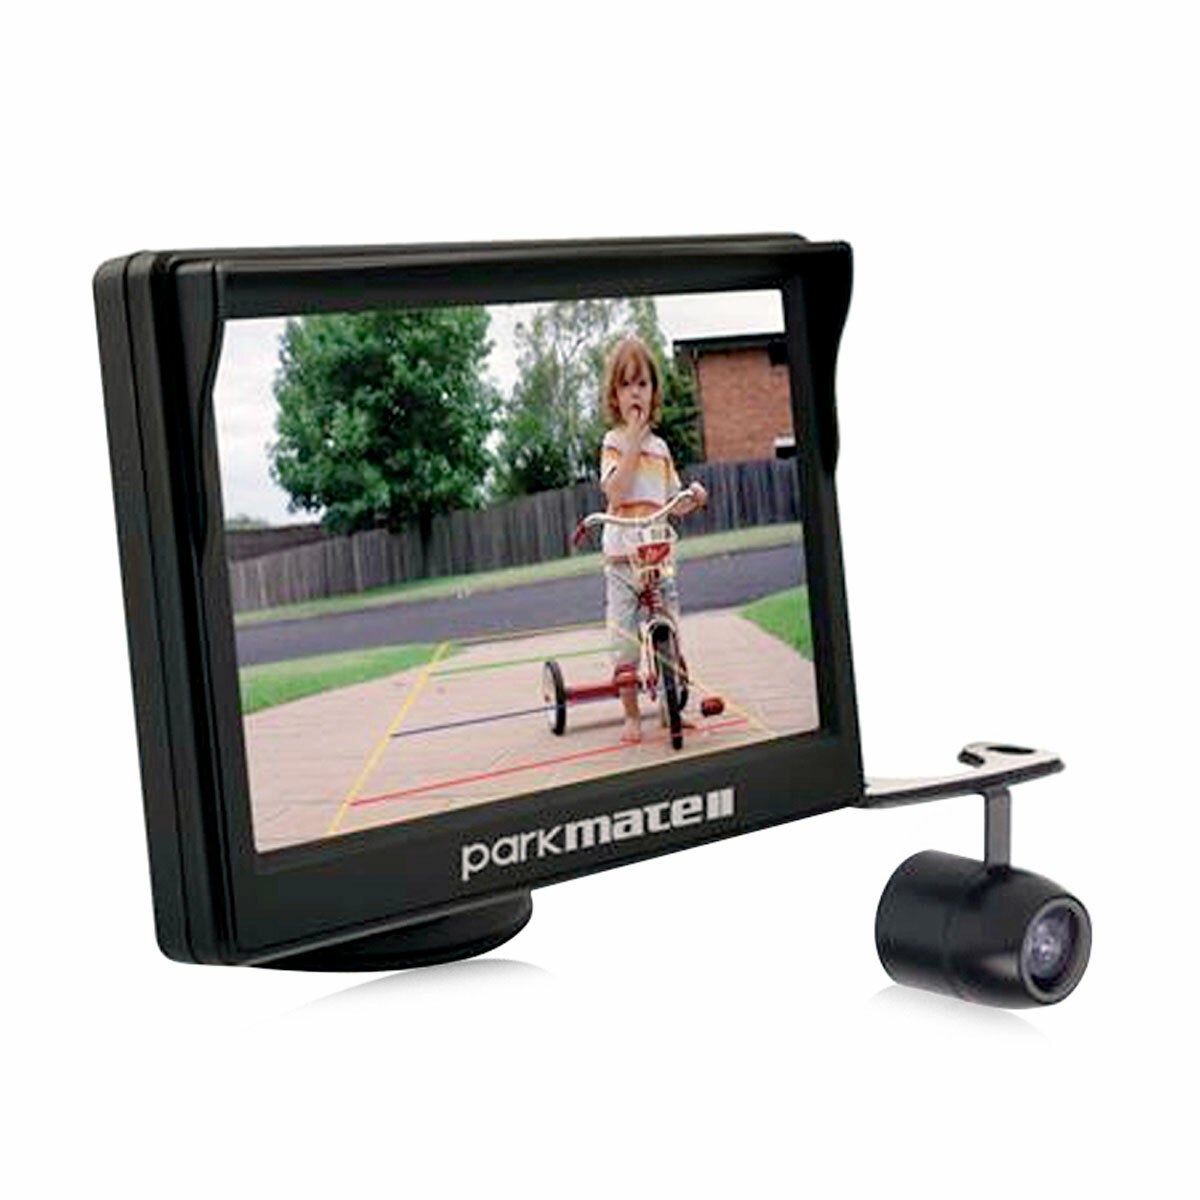 Image of Parkmate 5.0 Inch Monitor and Camera Package RVK50